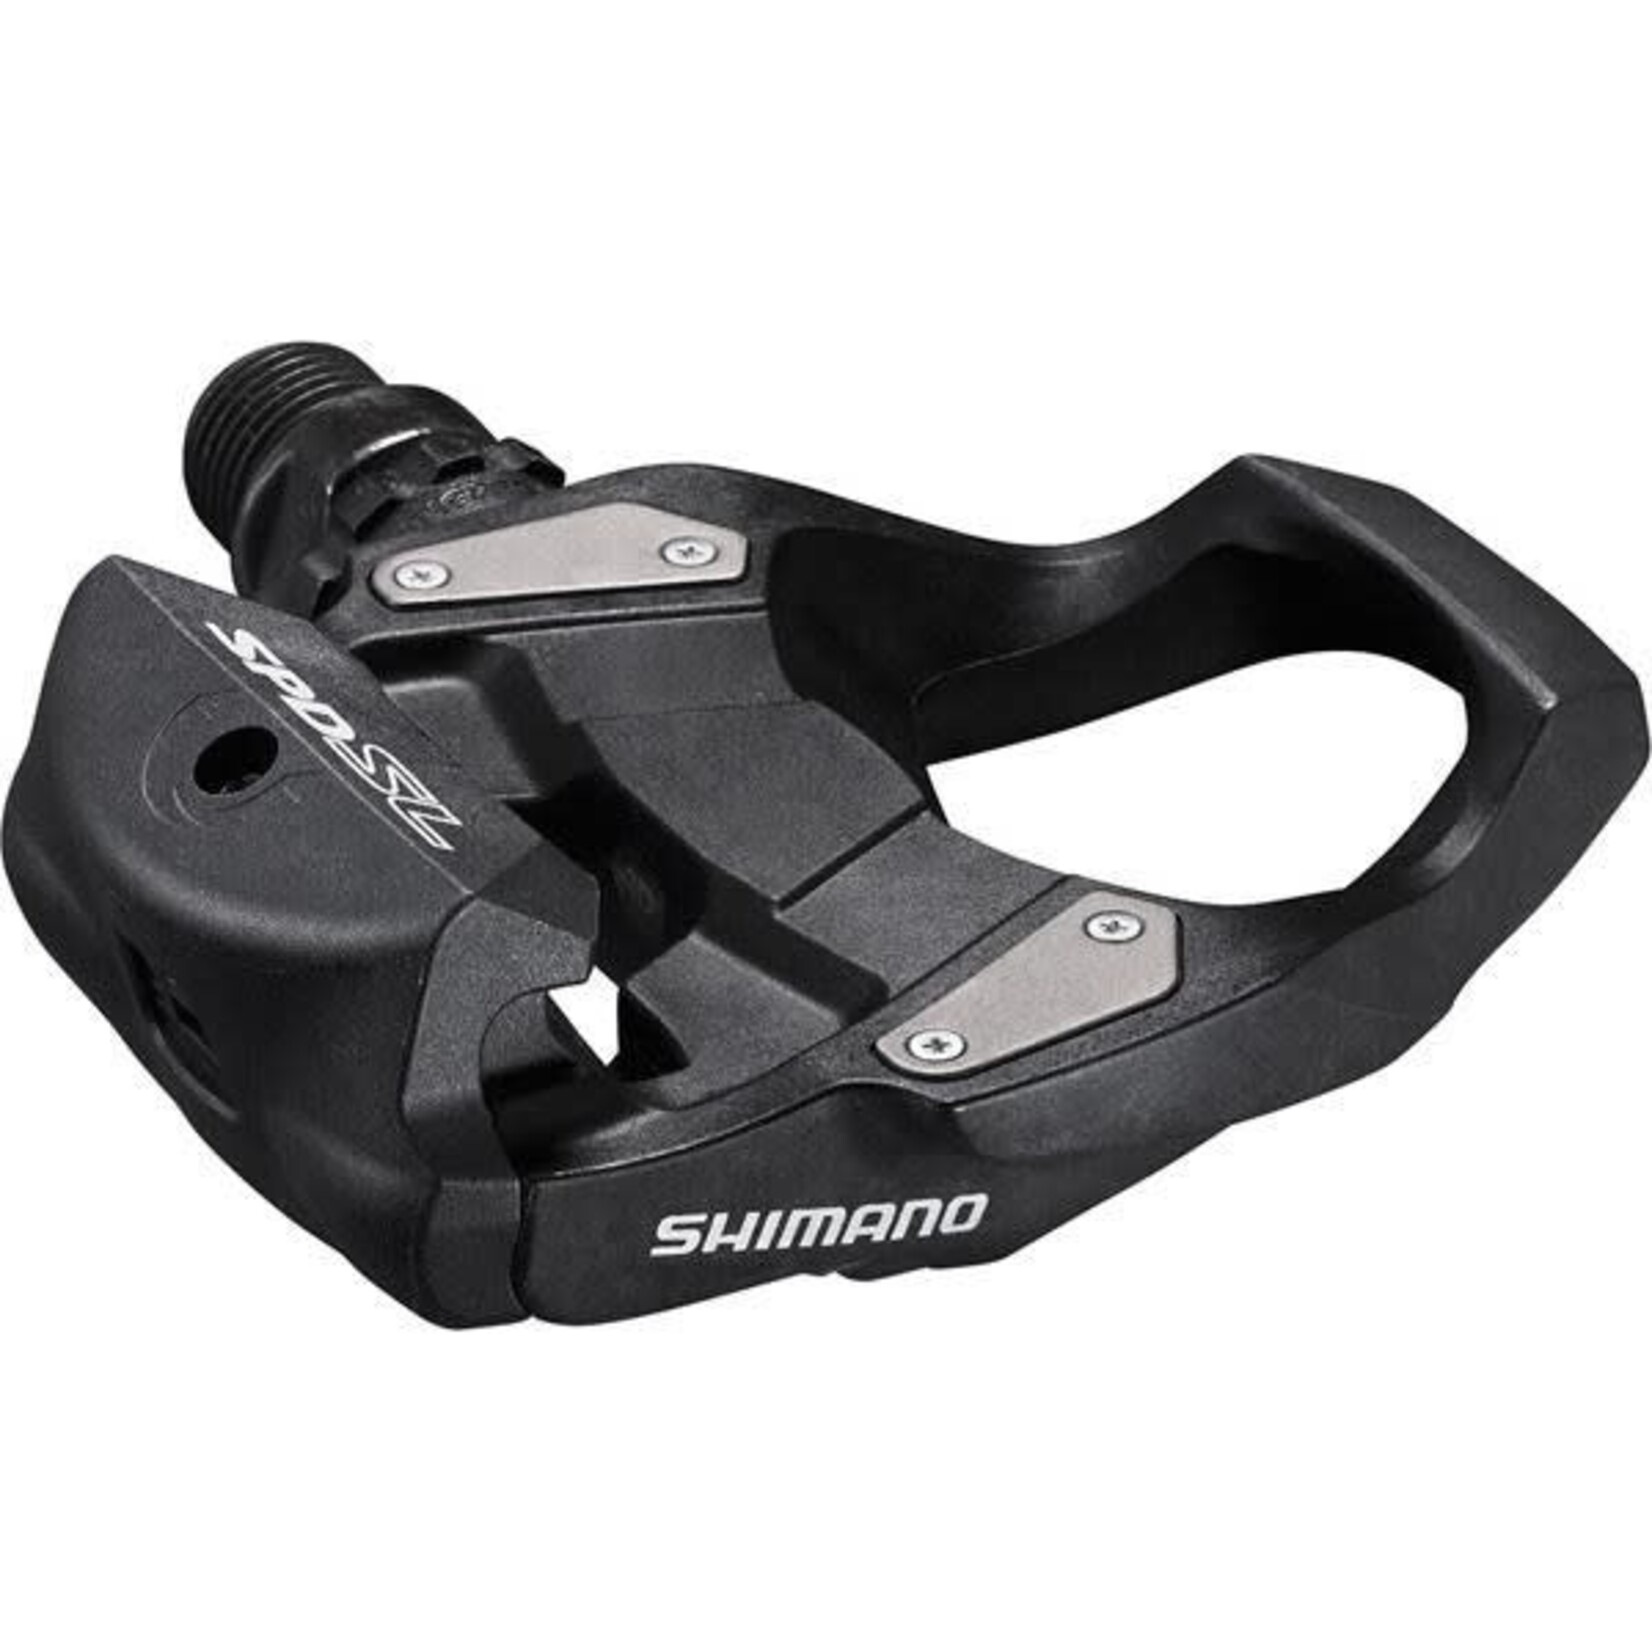 Shimano Pedals Shimano PD-RS500 SPD-SL pedal, black